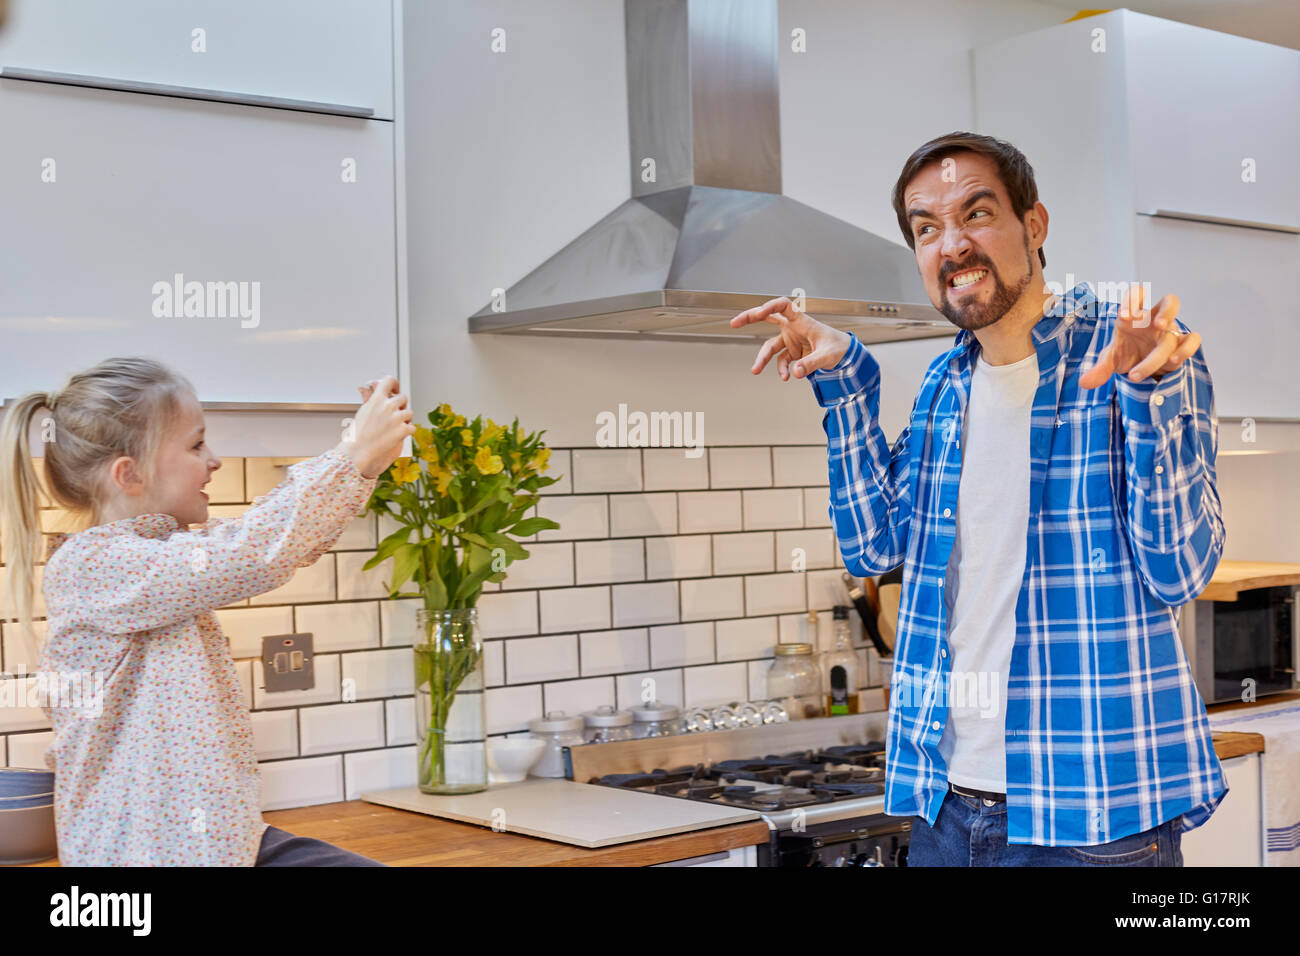 Daughter taking photograph of funny-faced father in kitchen Stock Photo